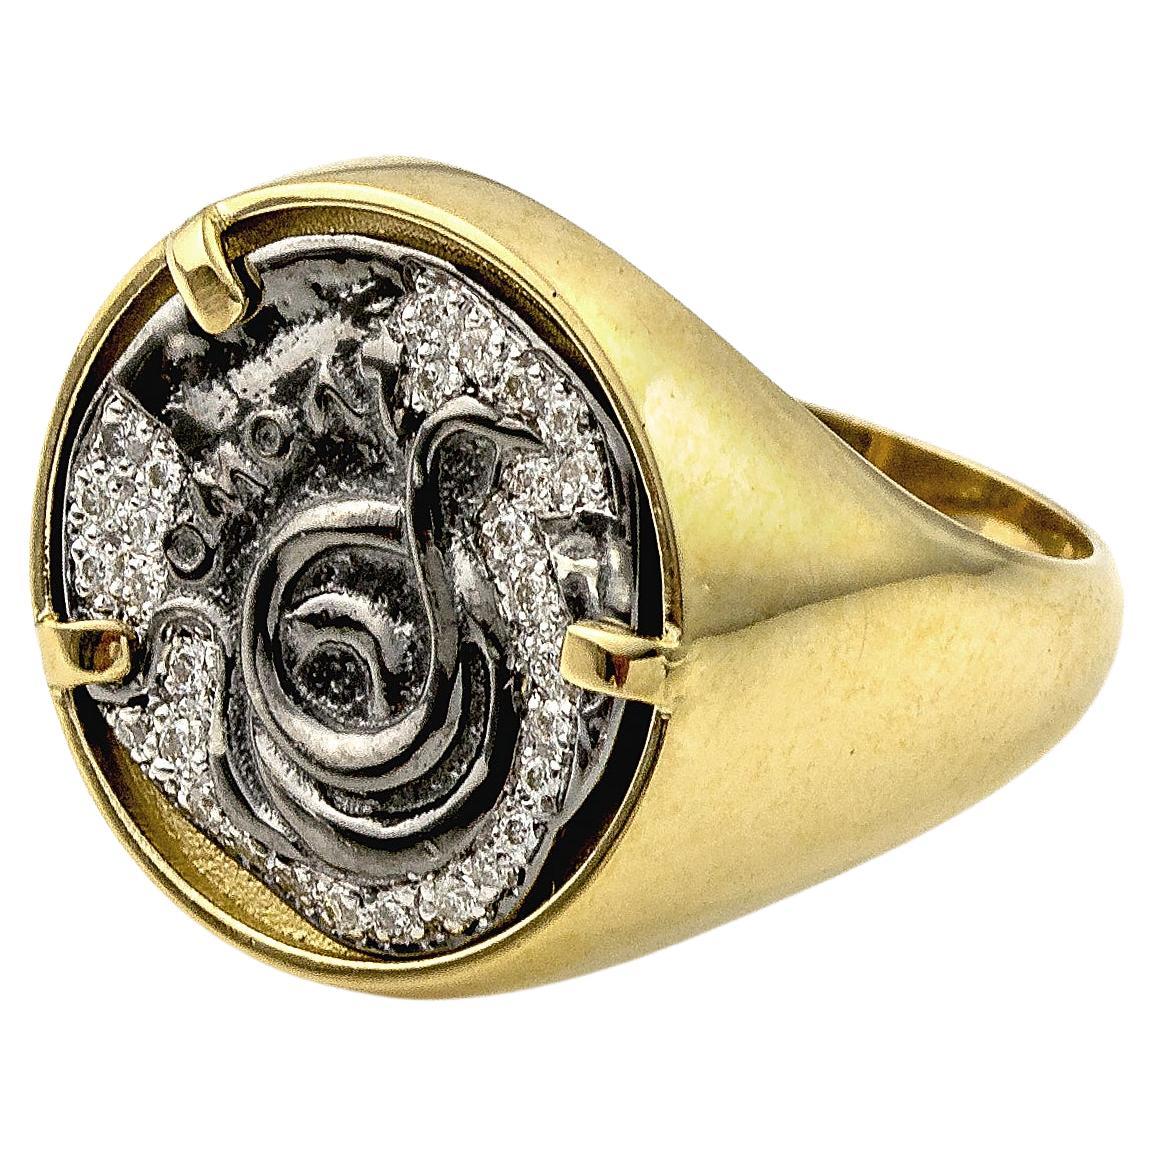 Serpent Coin Ring in Gold, Silver and Diamonds